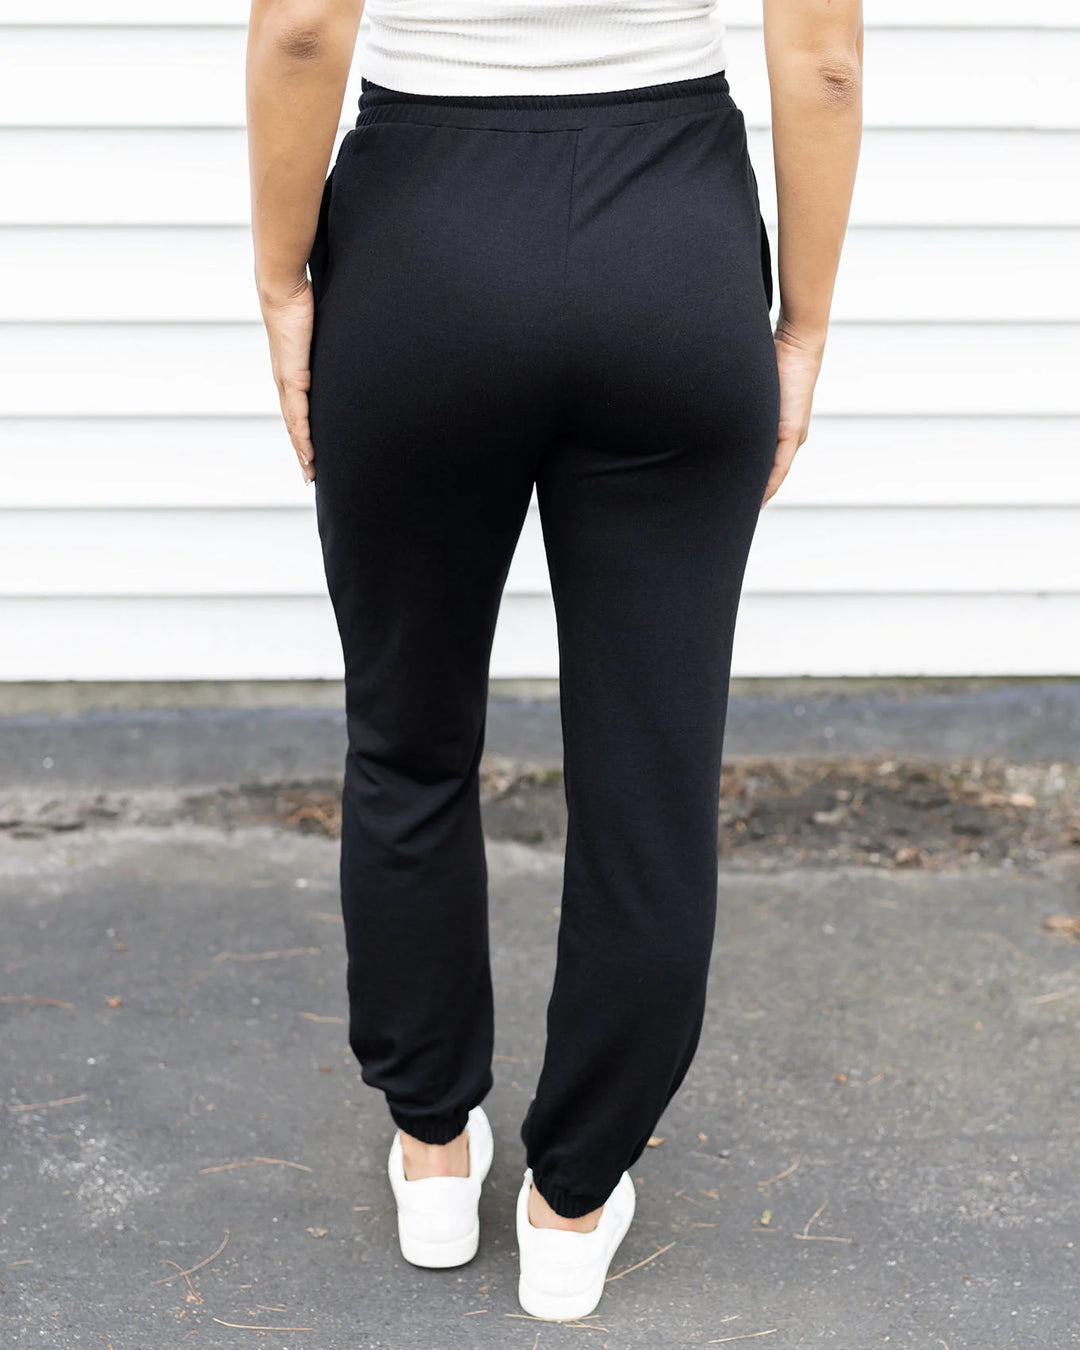 **PREORDER** Grace and Lace | Signature Soft Sweatpants | Black - ESTIMATED TO SHIP SEP 27